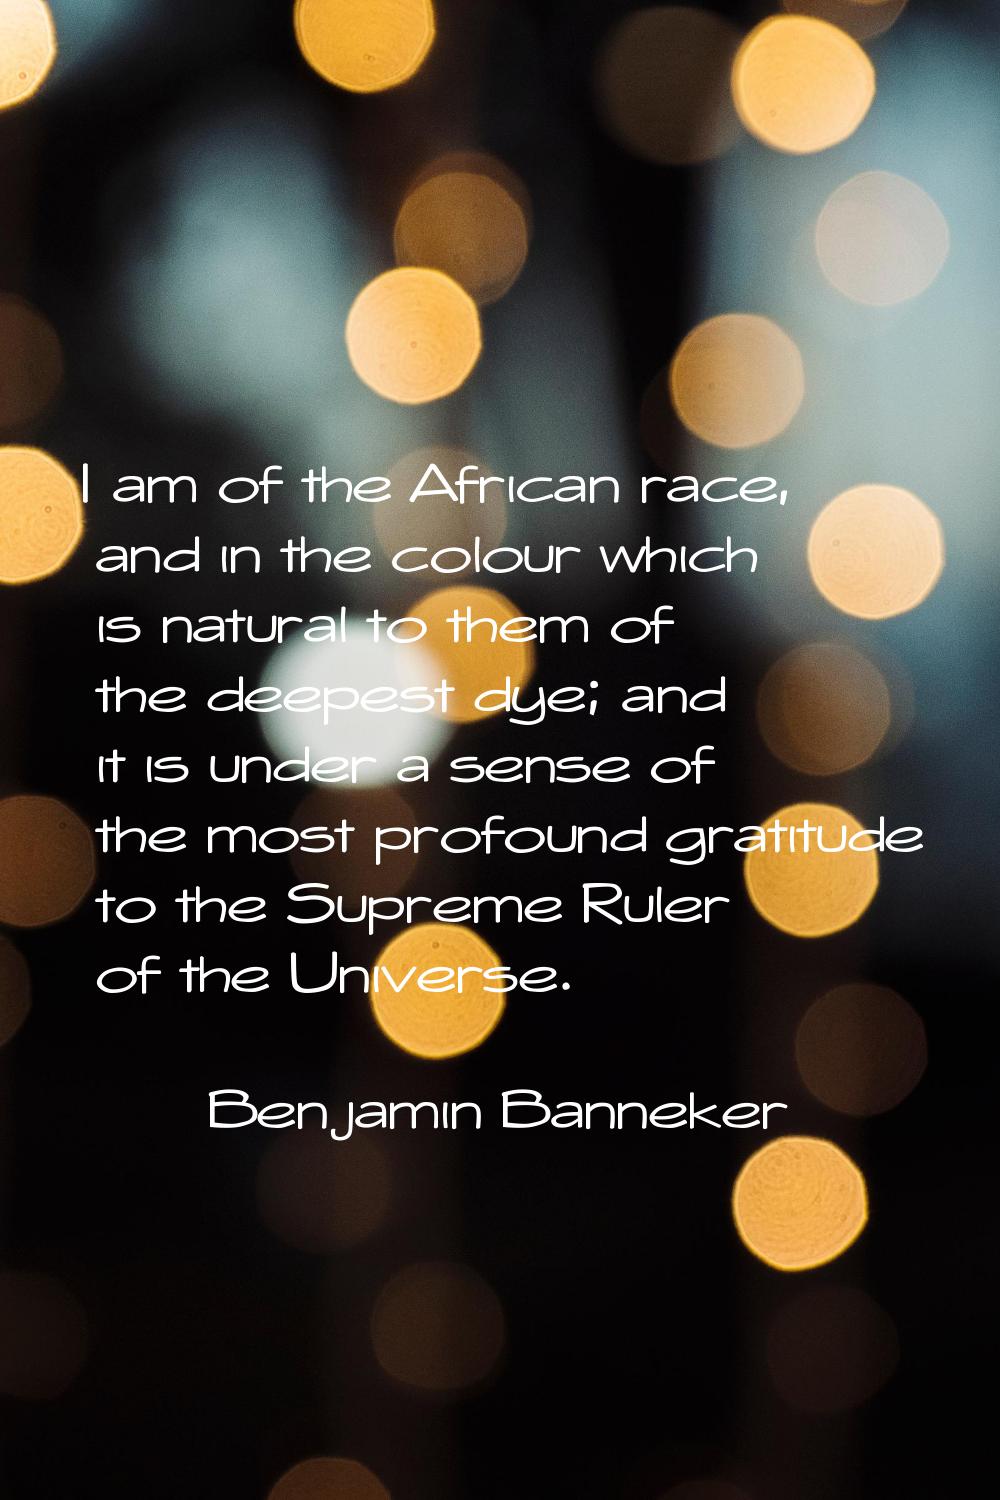 I am of the African race, and in the colour which is natural to them of the deepest dye; and it is 